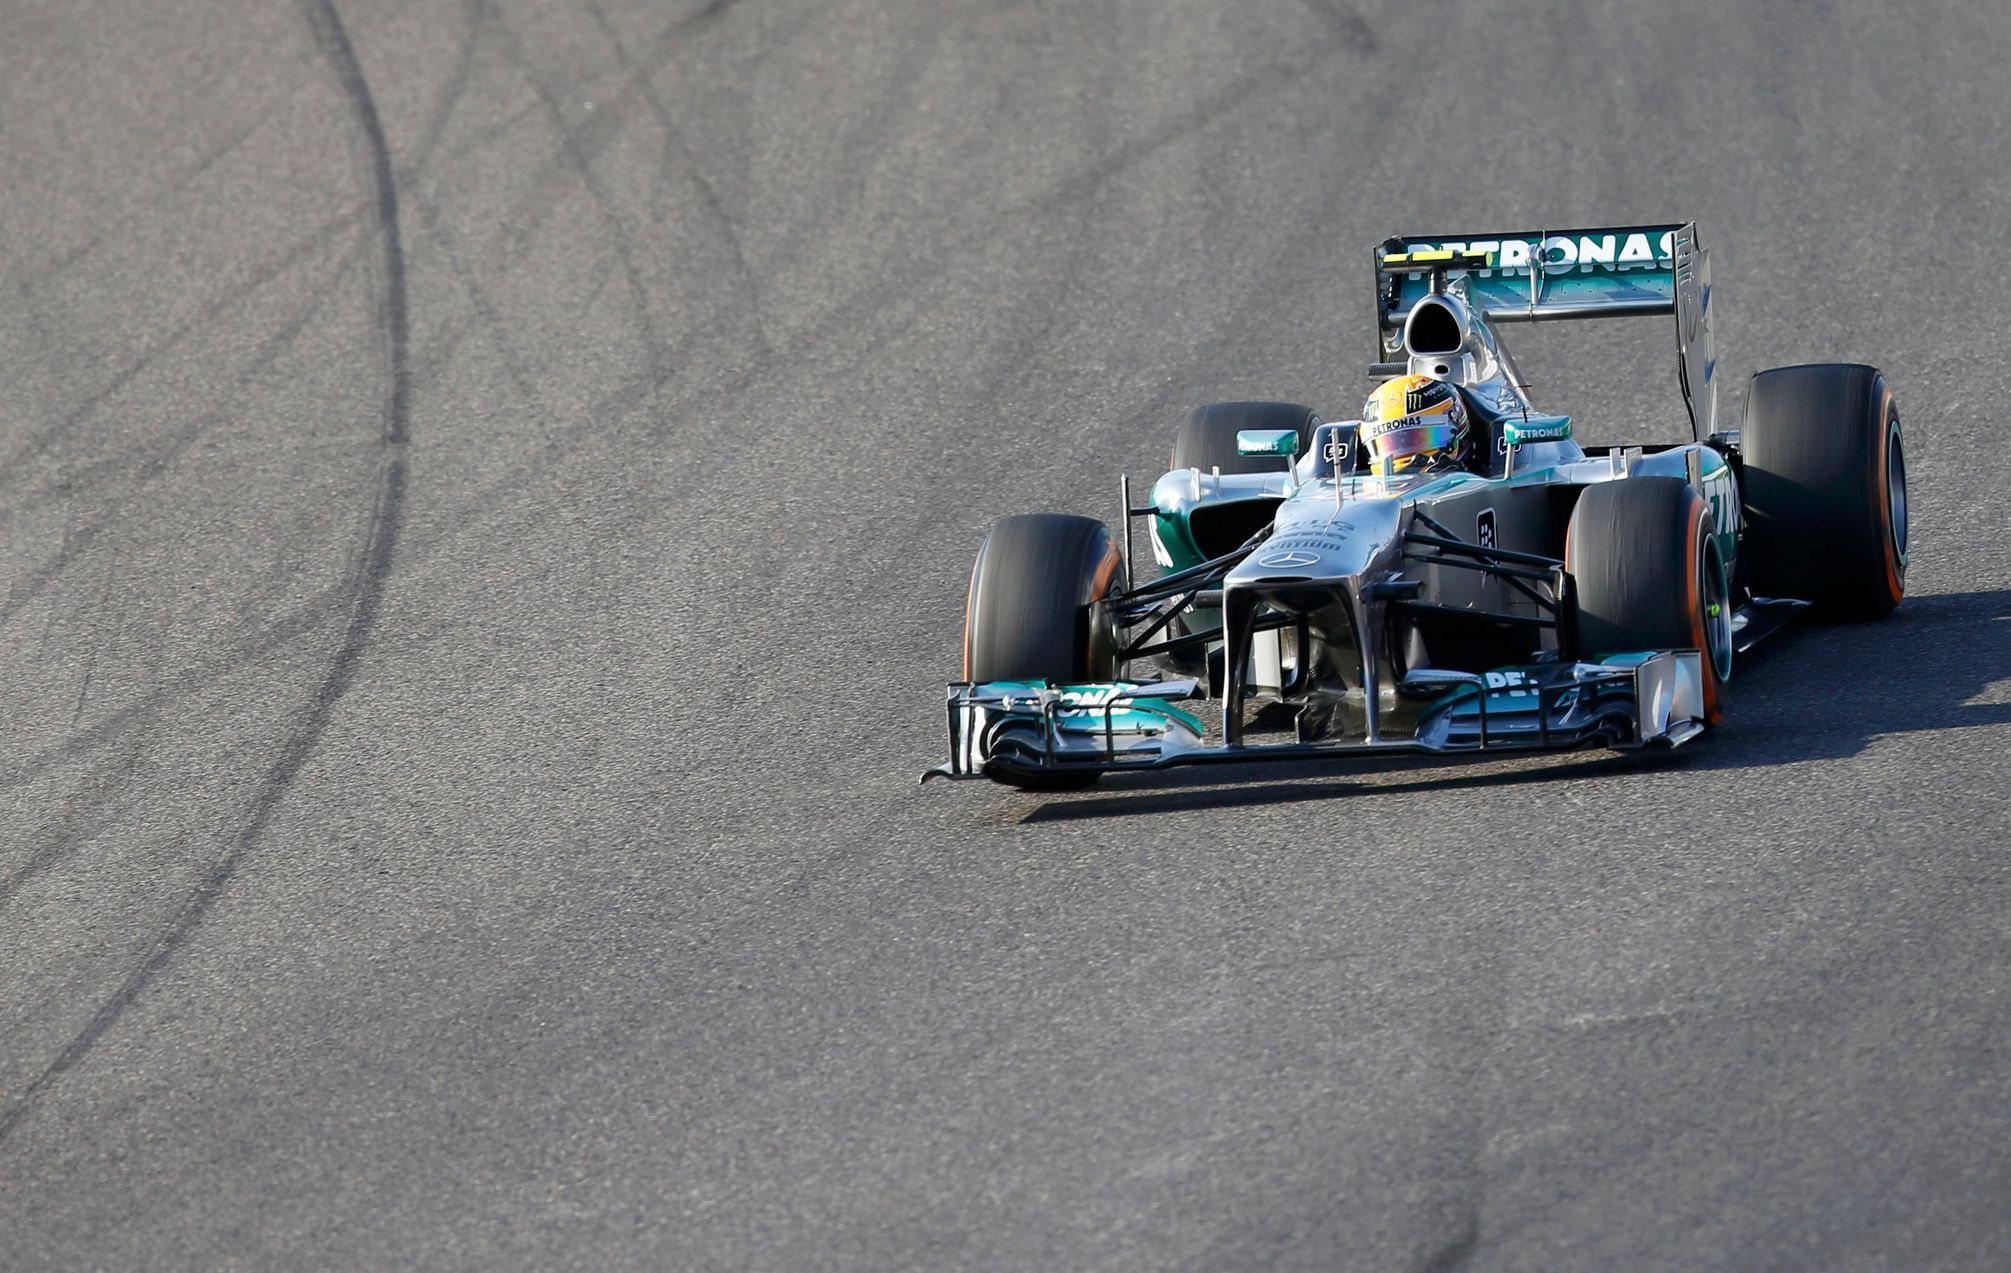 Mercedes Formula One driver Hamilton of Britain races during the Japanese F1 Grand Prix at the Suzuka circuit